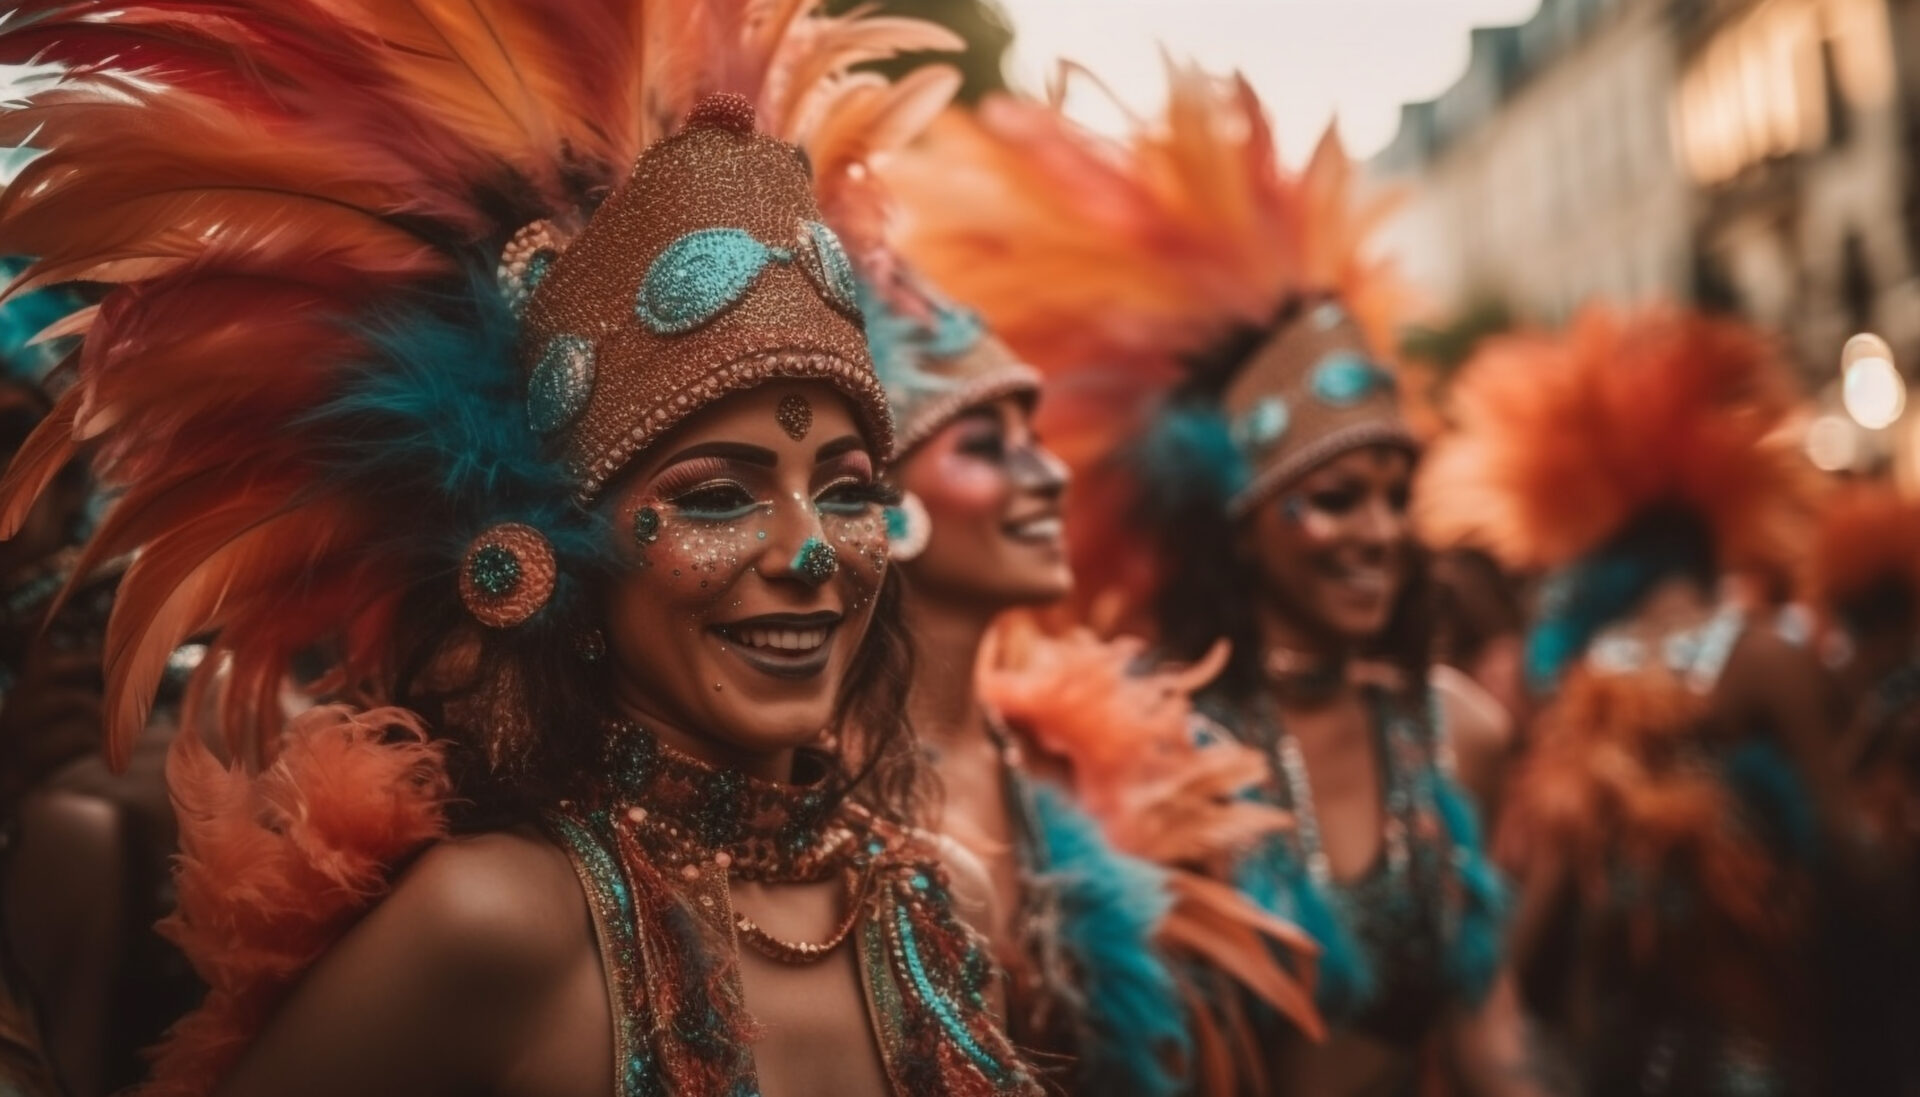 Smiling young women samba dancing in parade generated by AI